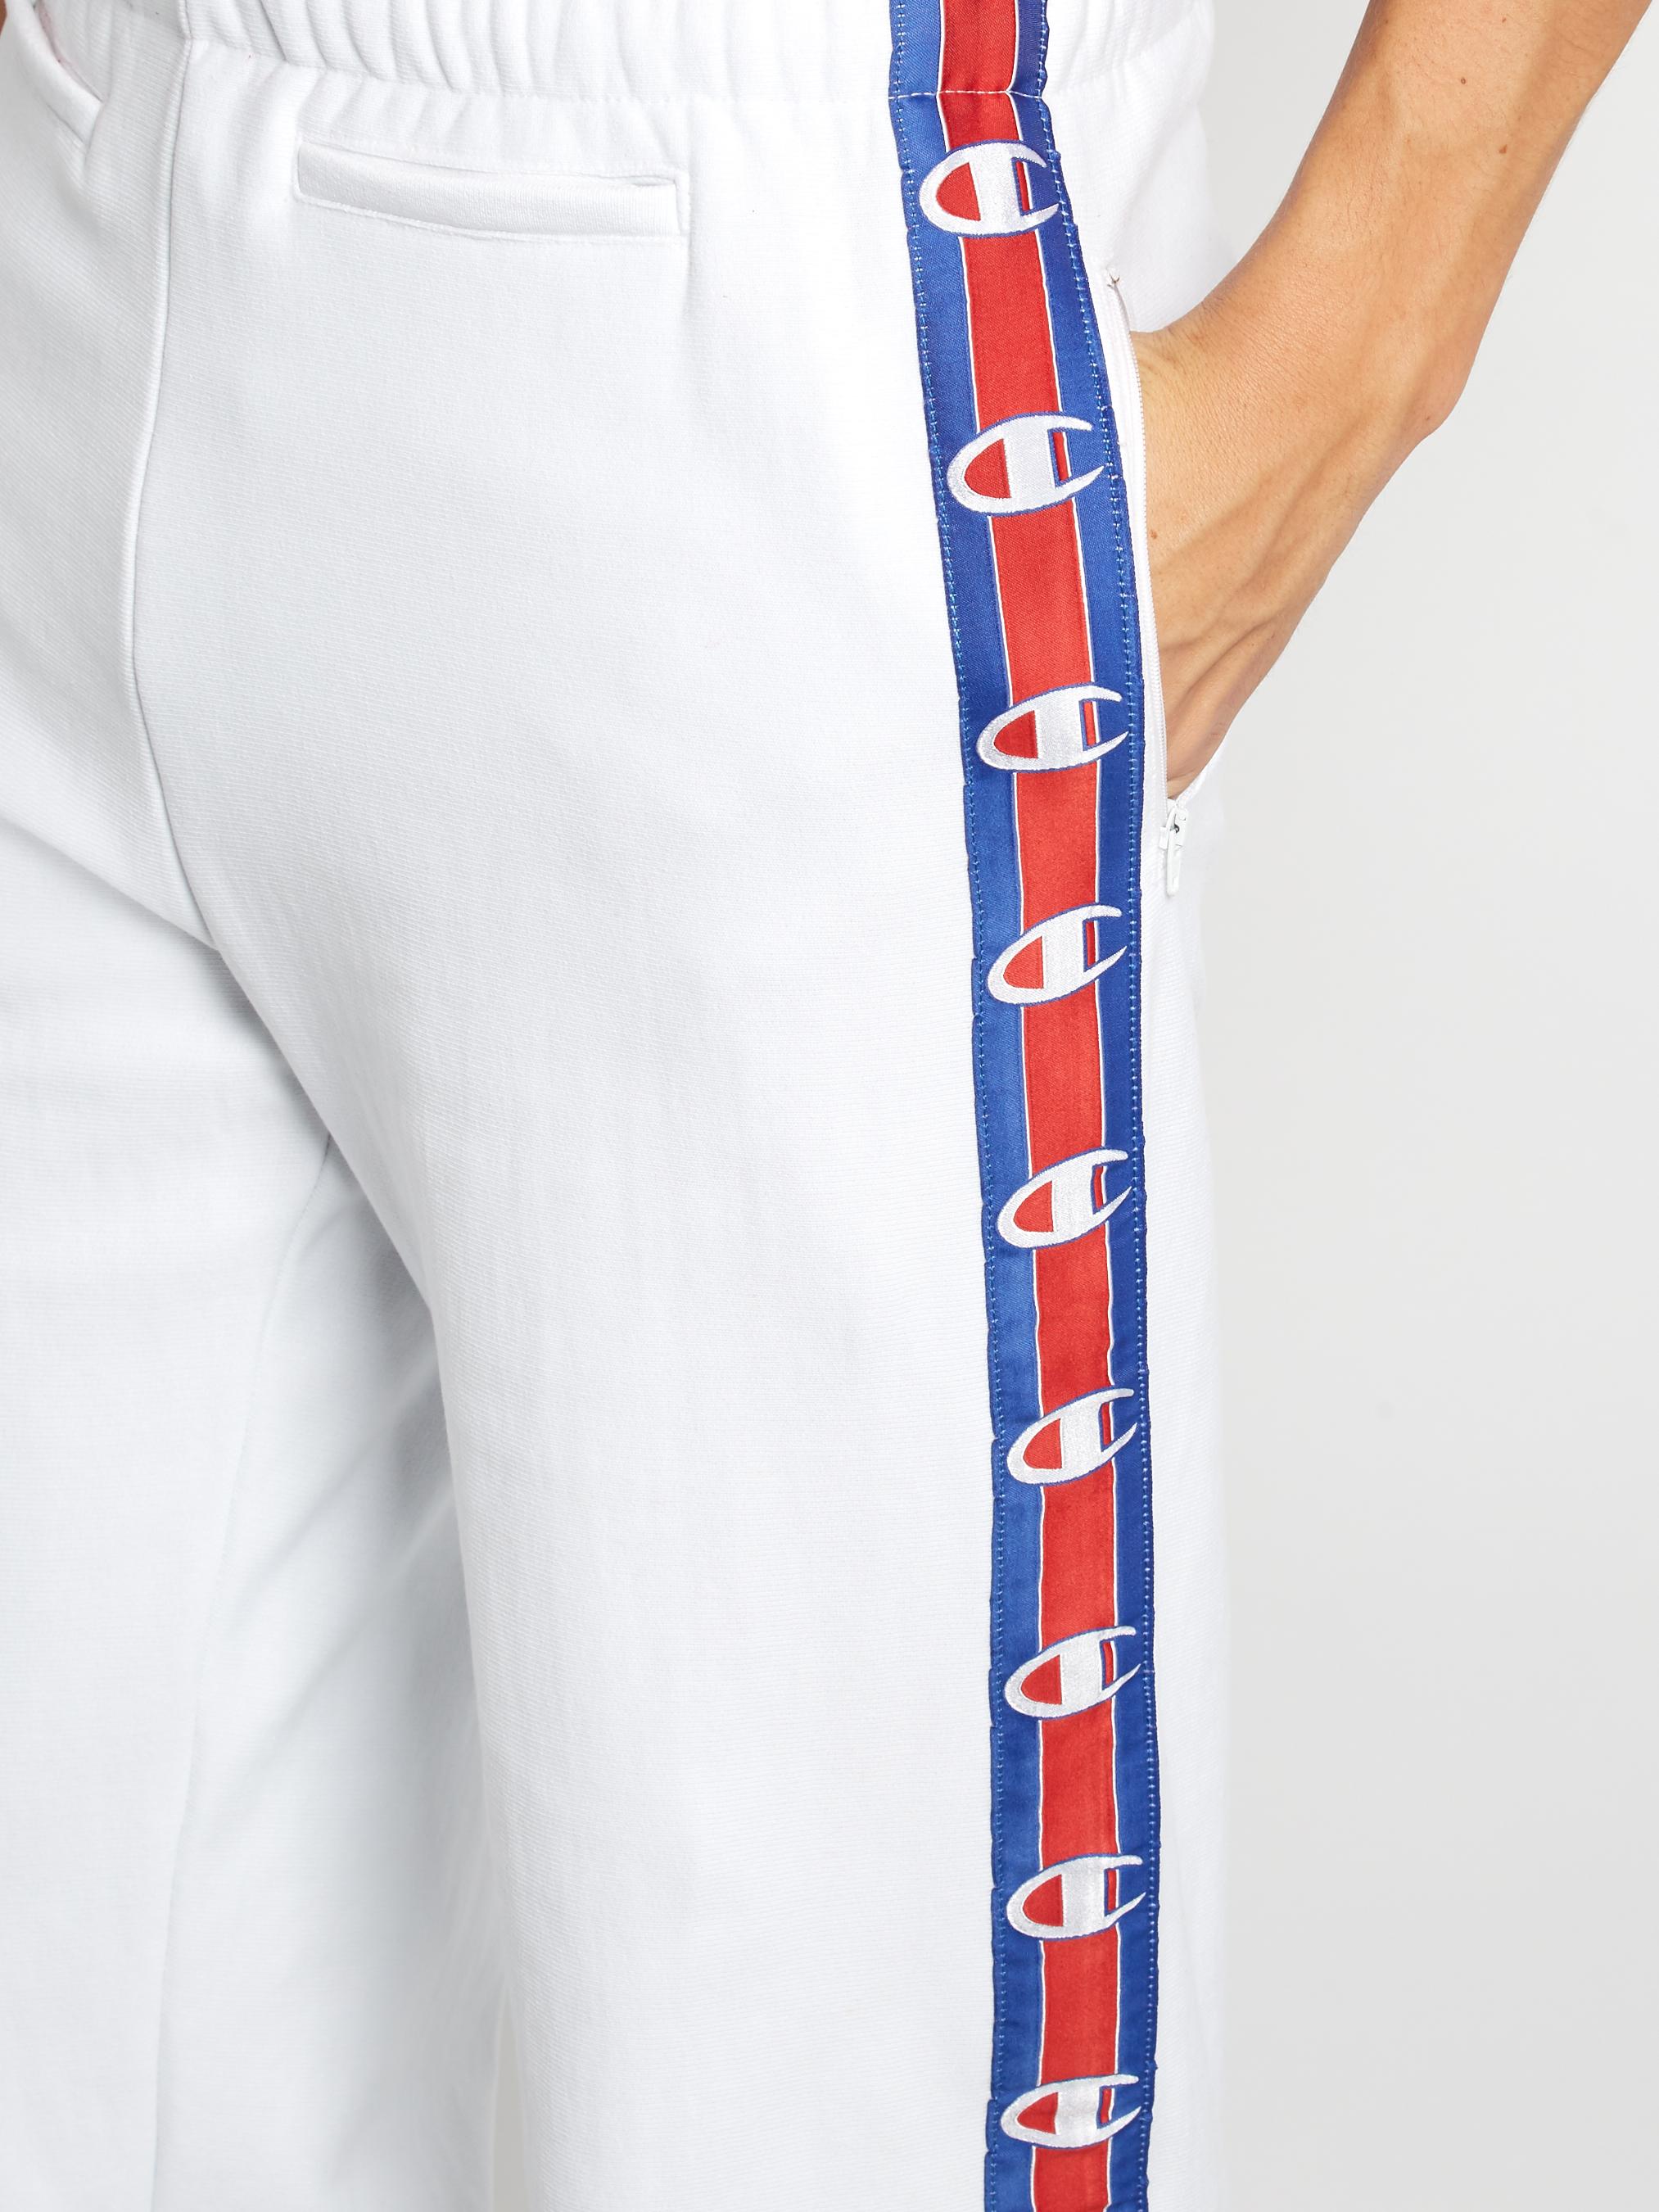 Vetements X Champion Cotton-blend Track Pants in White for Men - Lyst